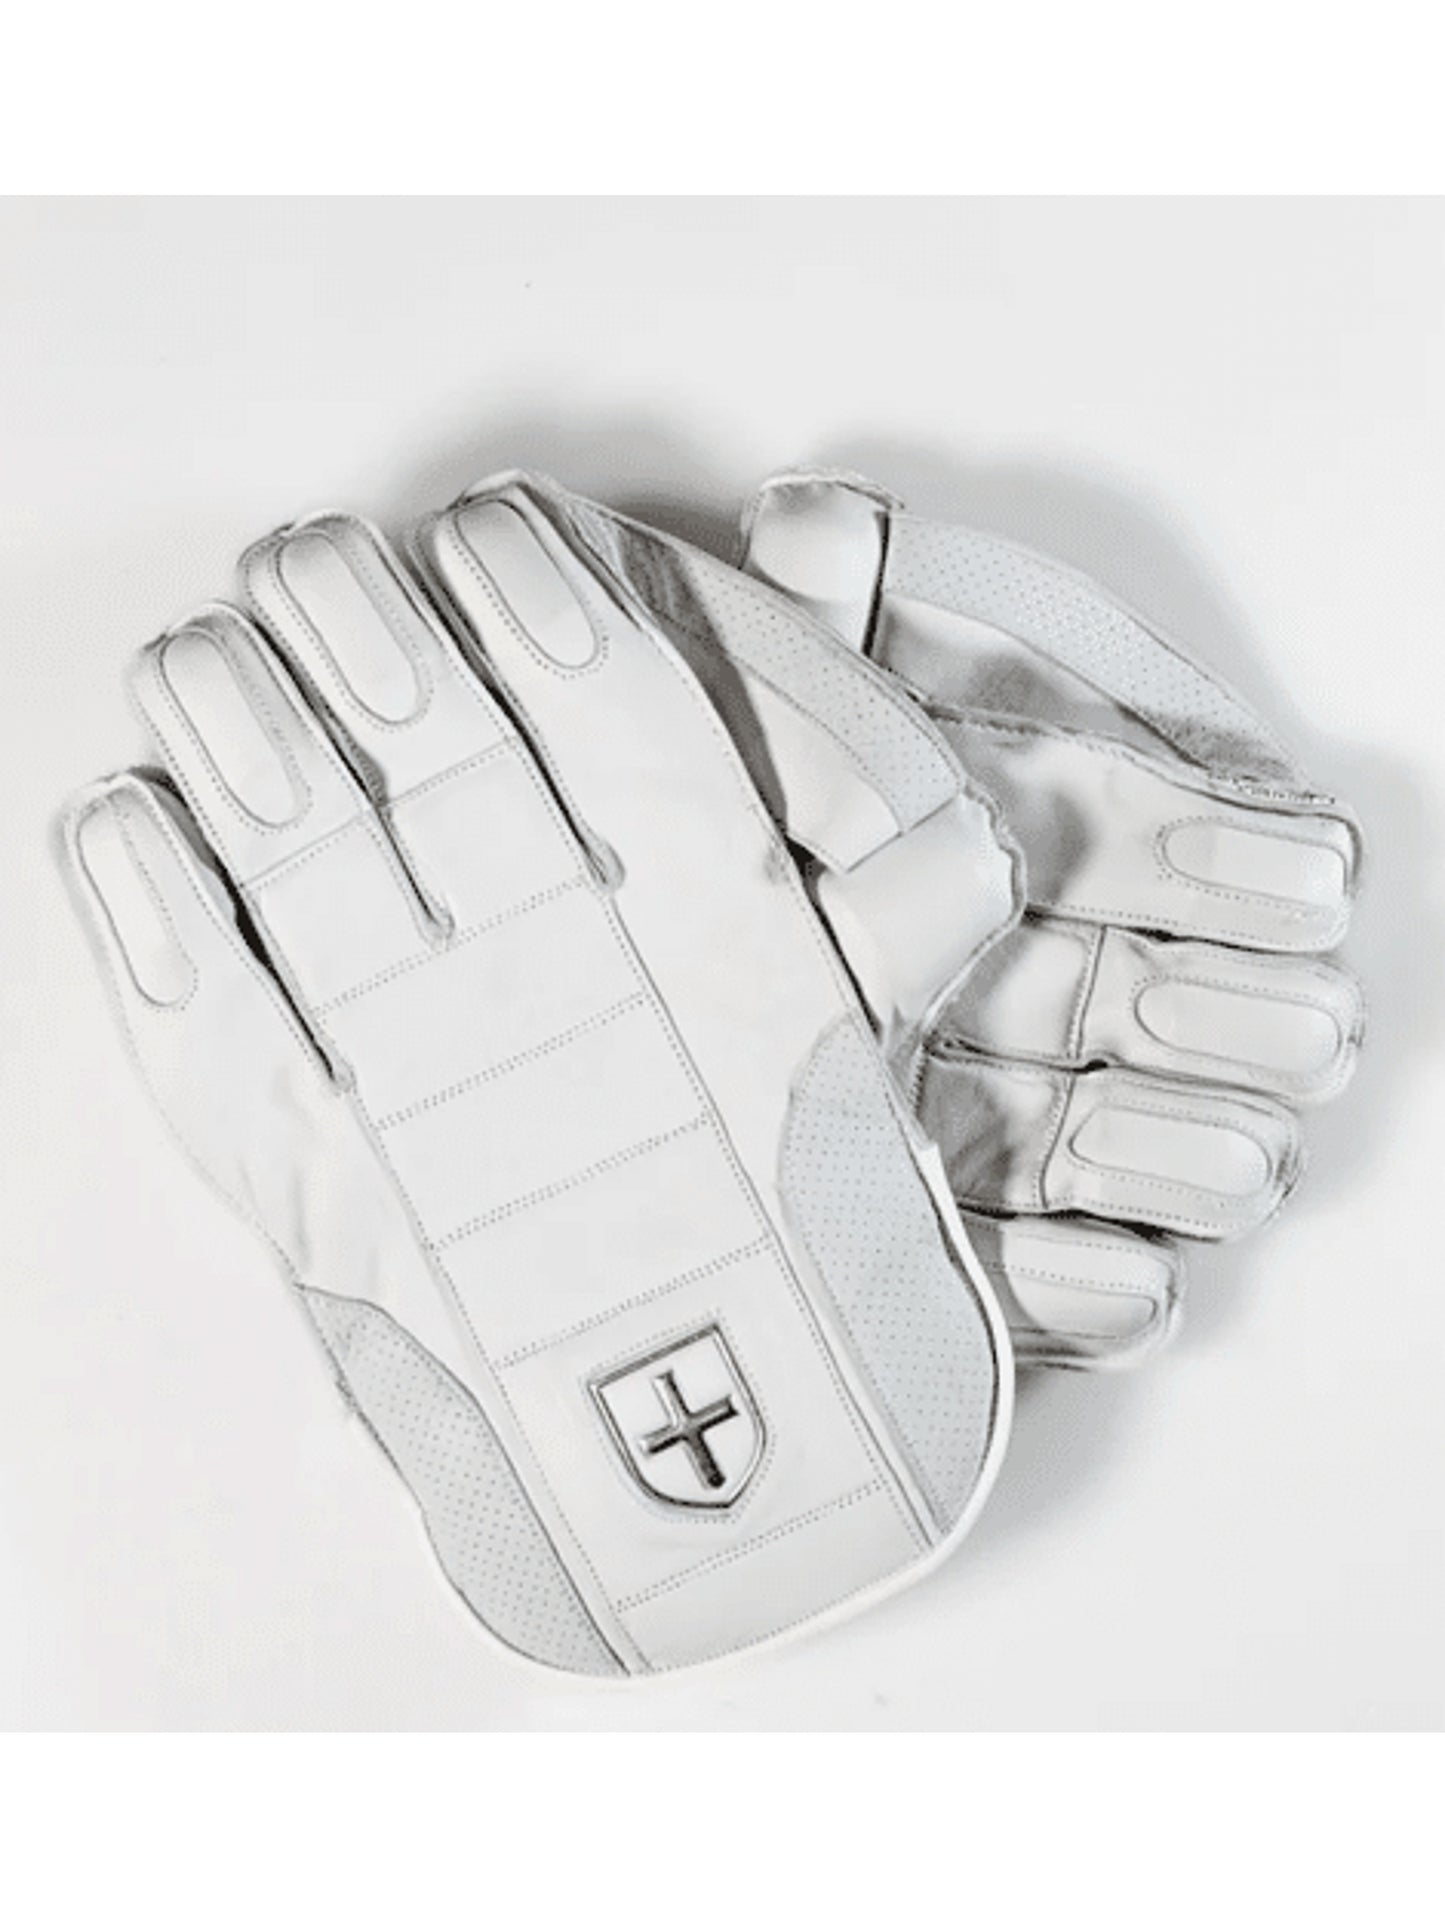 Focus Pro Wicket Keeping Gloves